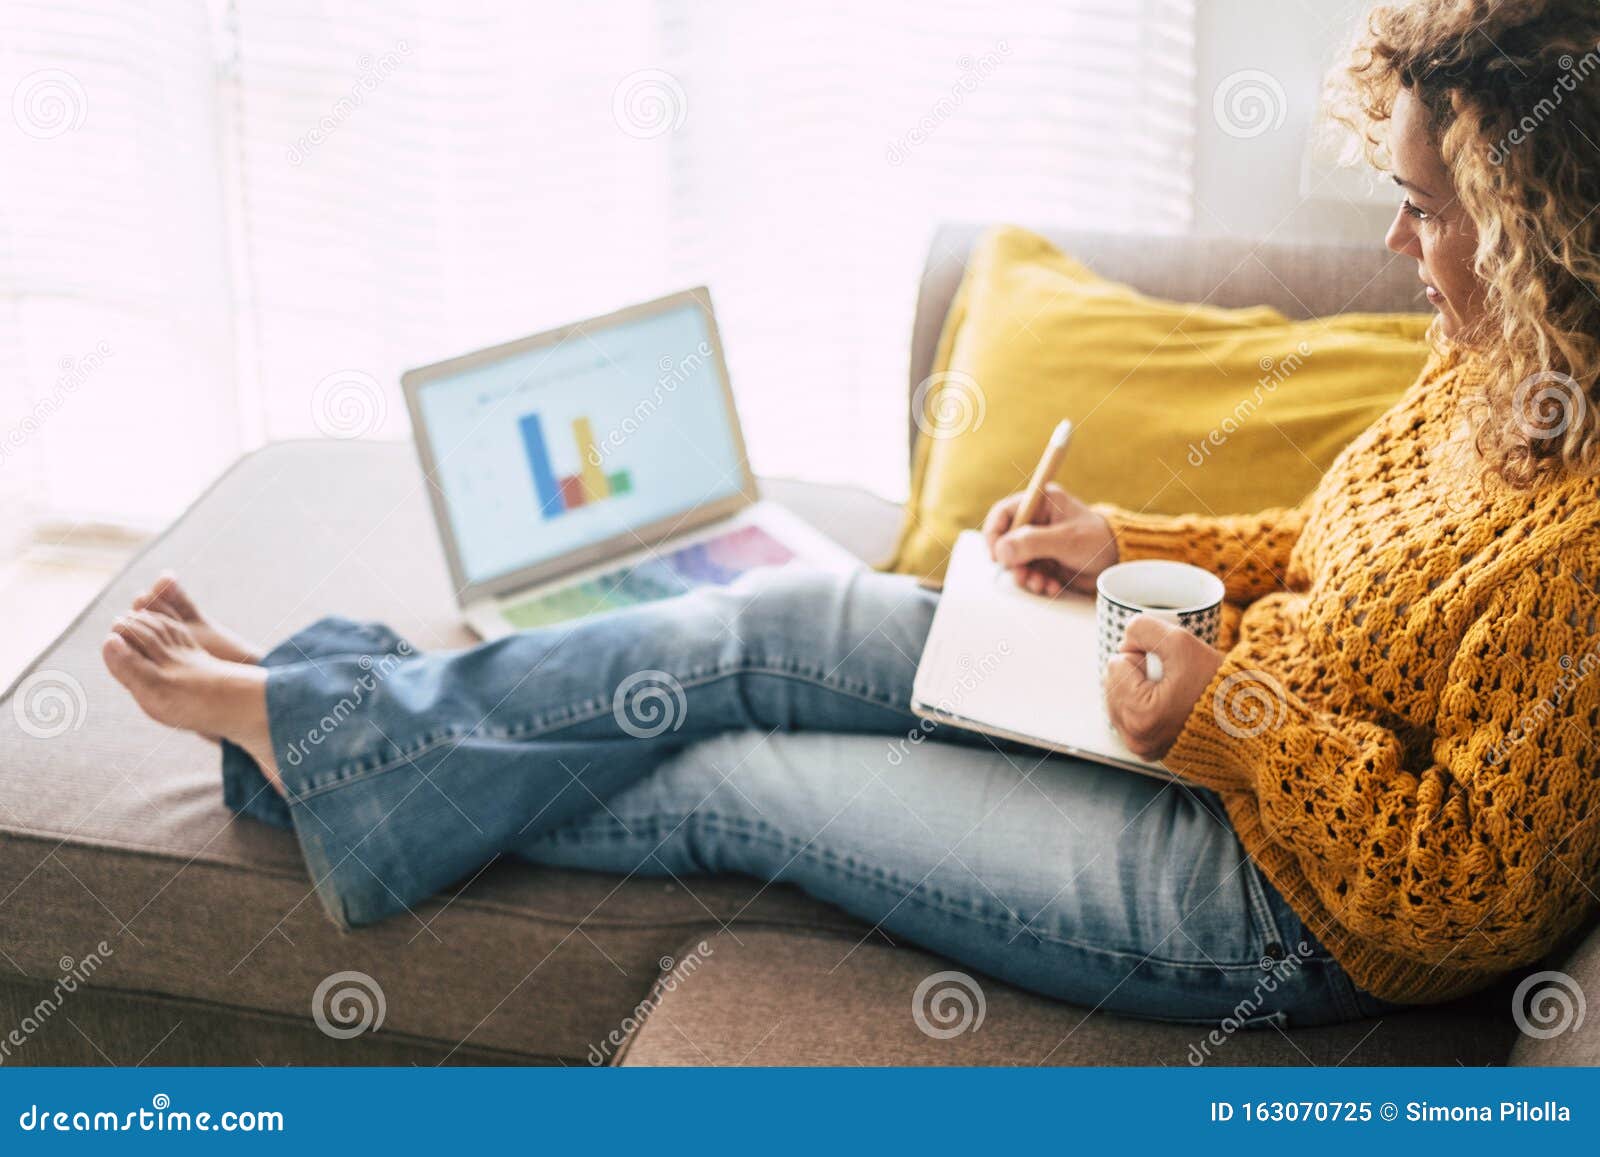 relaxed adult caucasian woman at work at home with personal laptop computer and notebook - economy and. business alternative